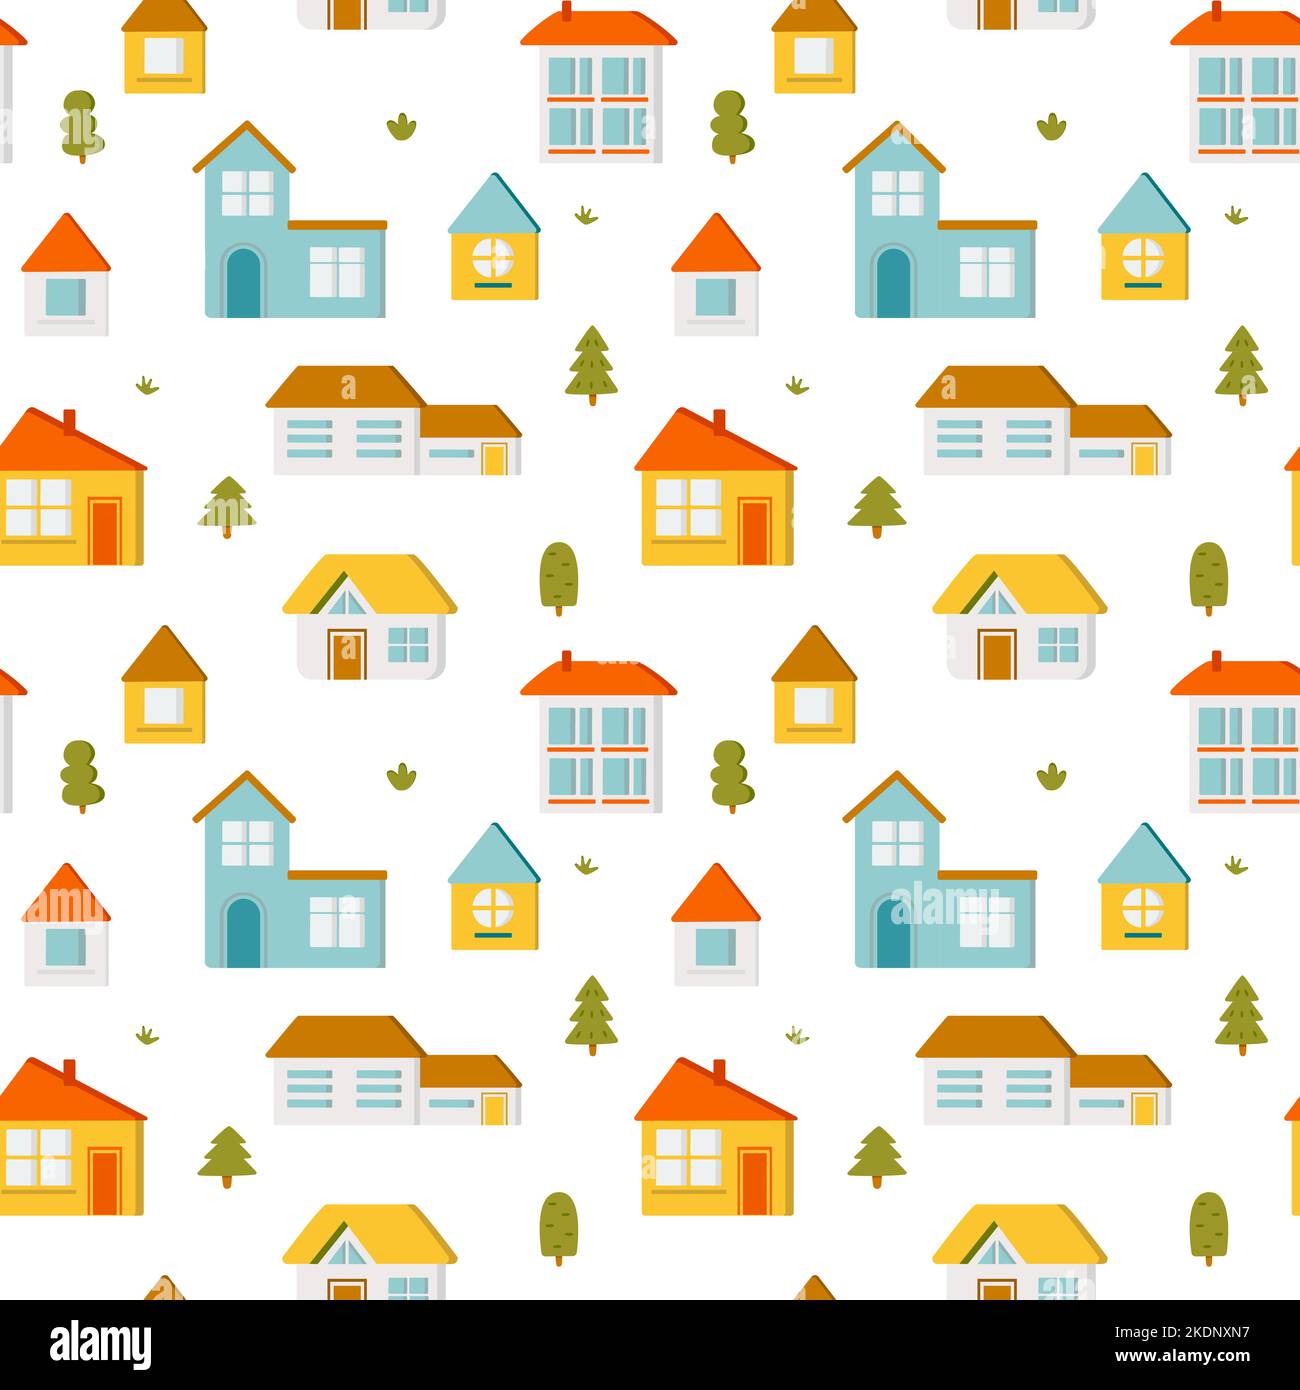 Cute Cozy Seamless Pattern Cute Home Stock Vector (Royalty Free